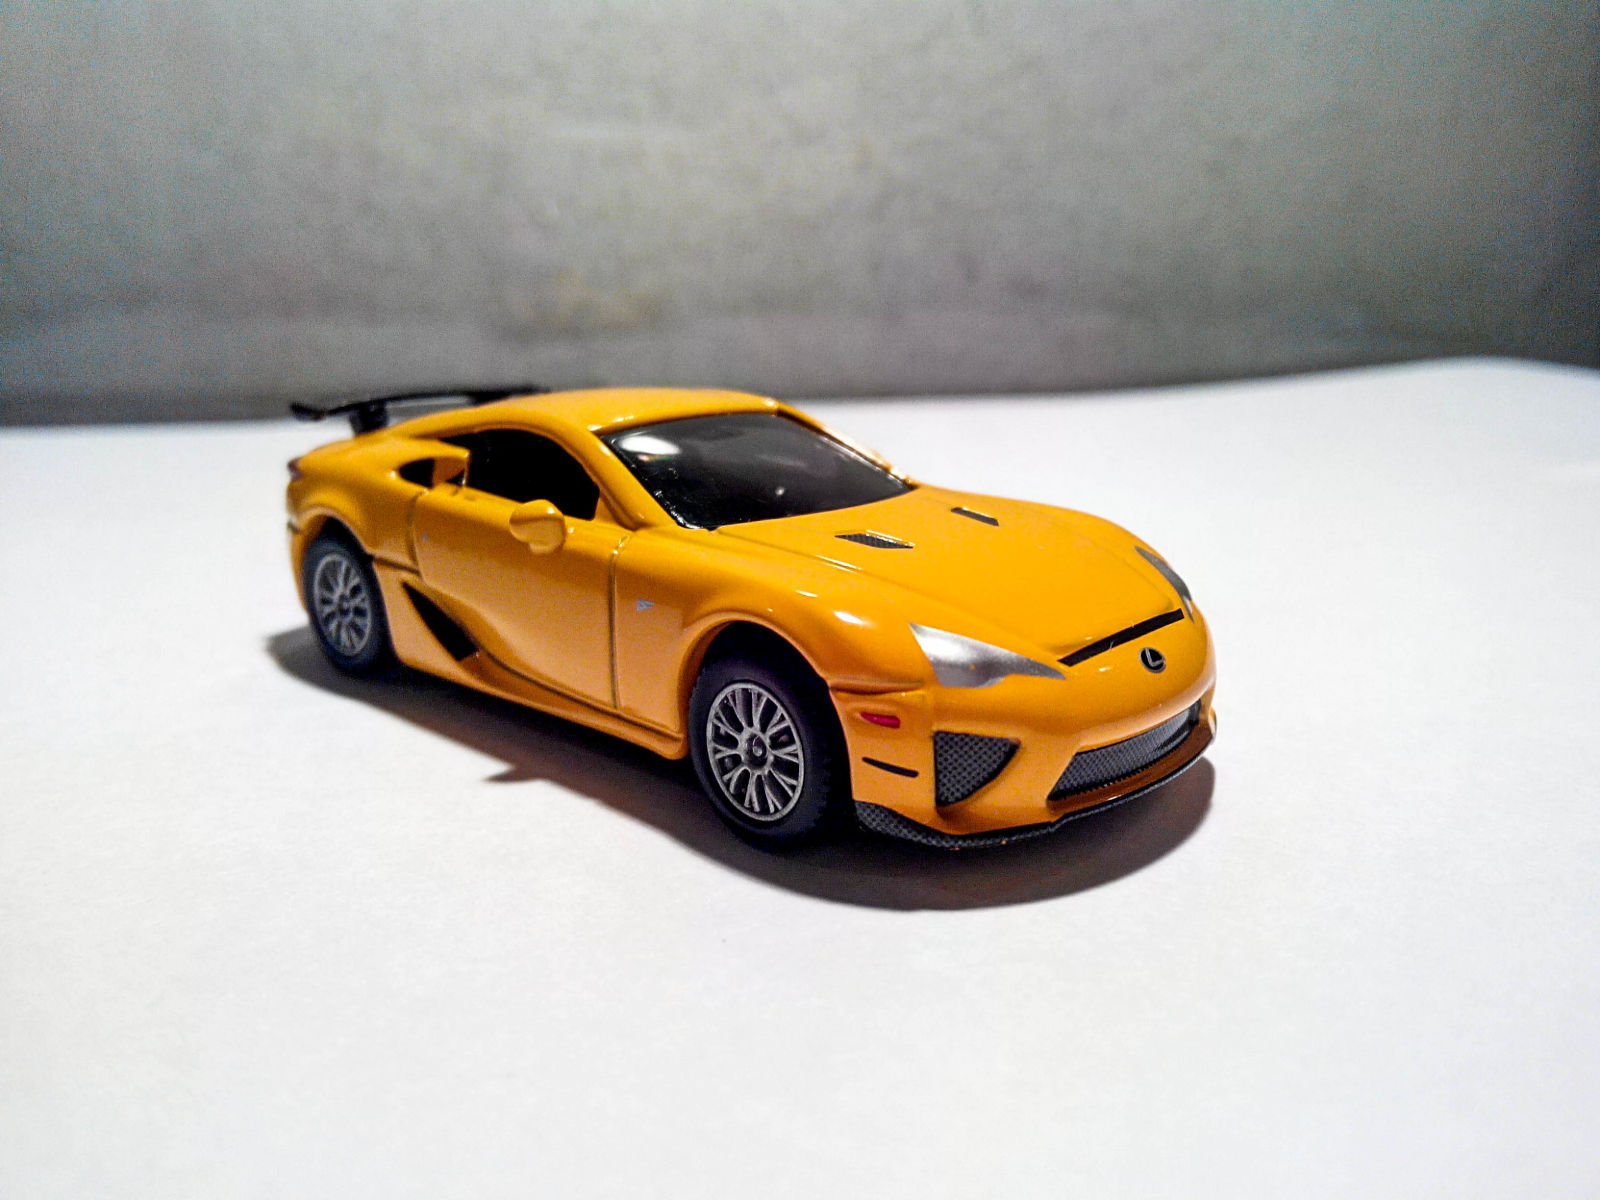 Illustration for article titled Pearls of the Far East : Tomica Limited Lexus LFA